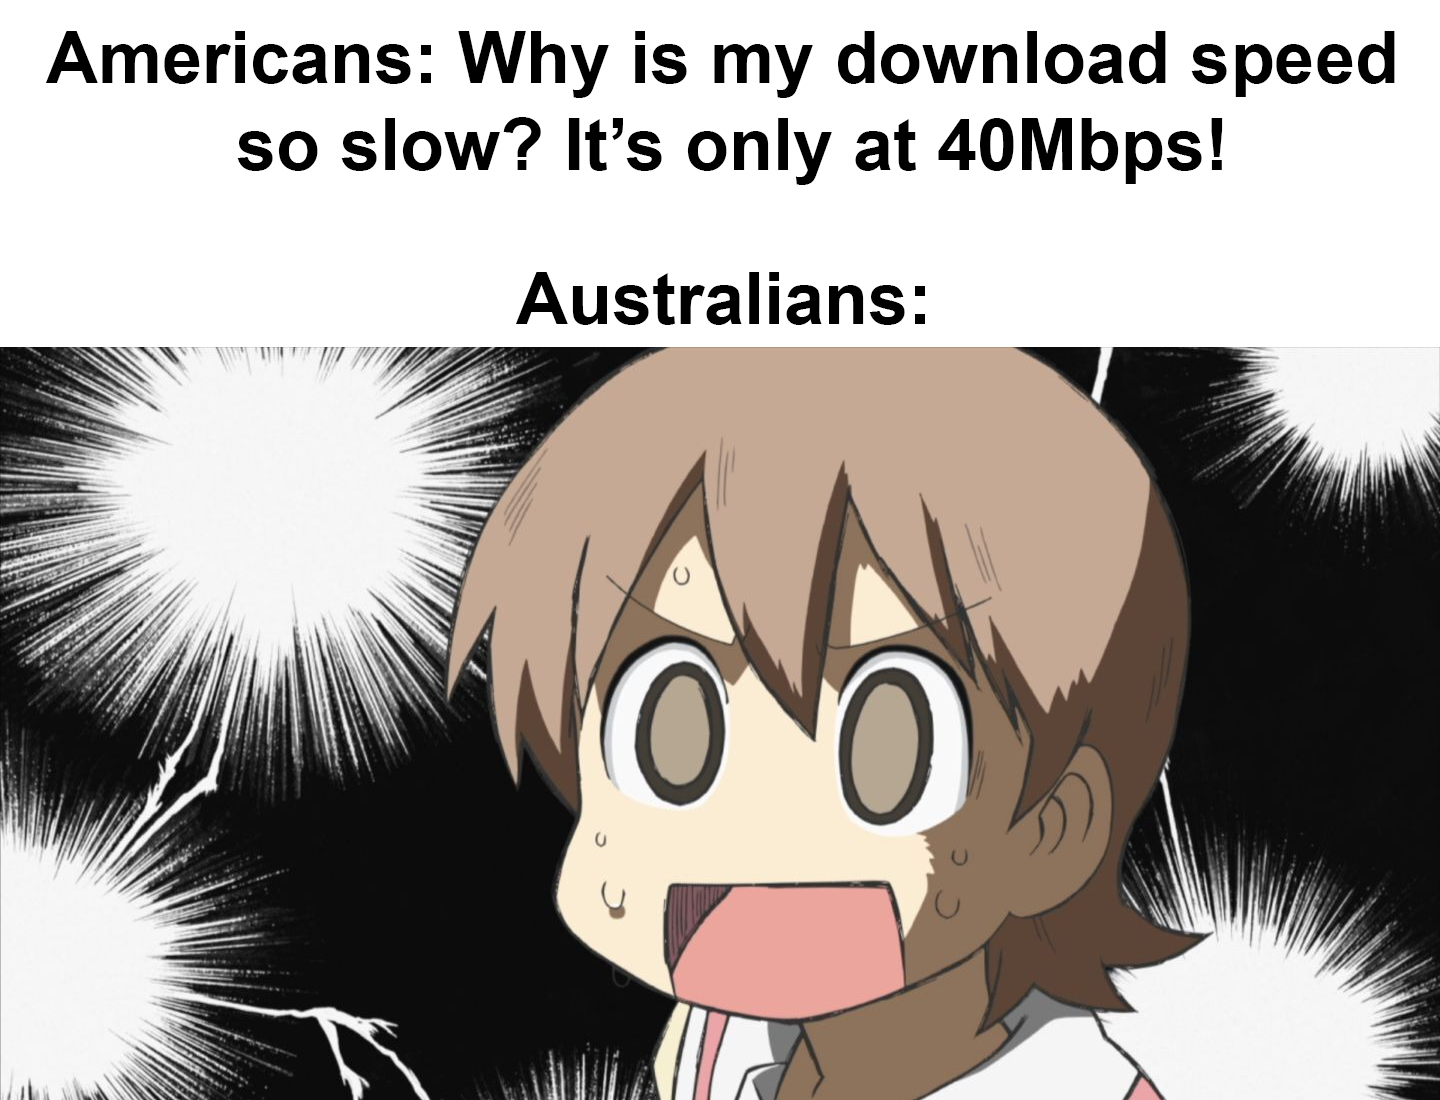 funny memes - cartoon - Americans Why is my download speed so slow? It's only at 40Mbps! Australians